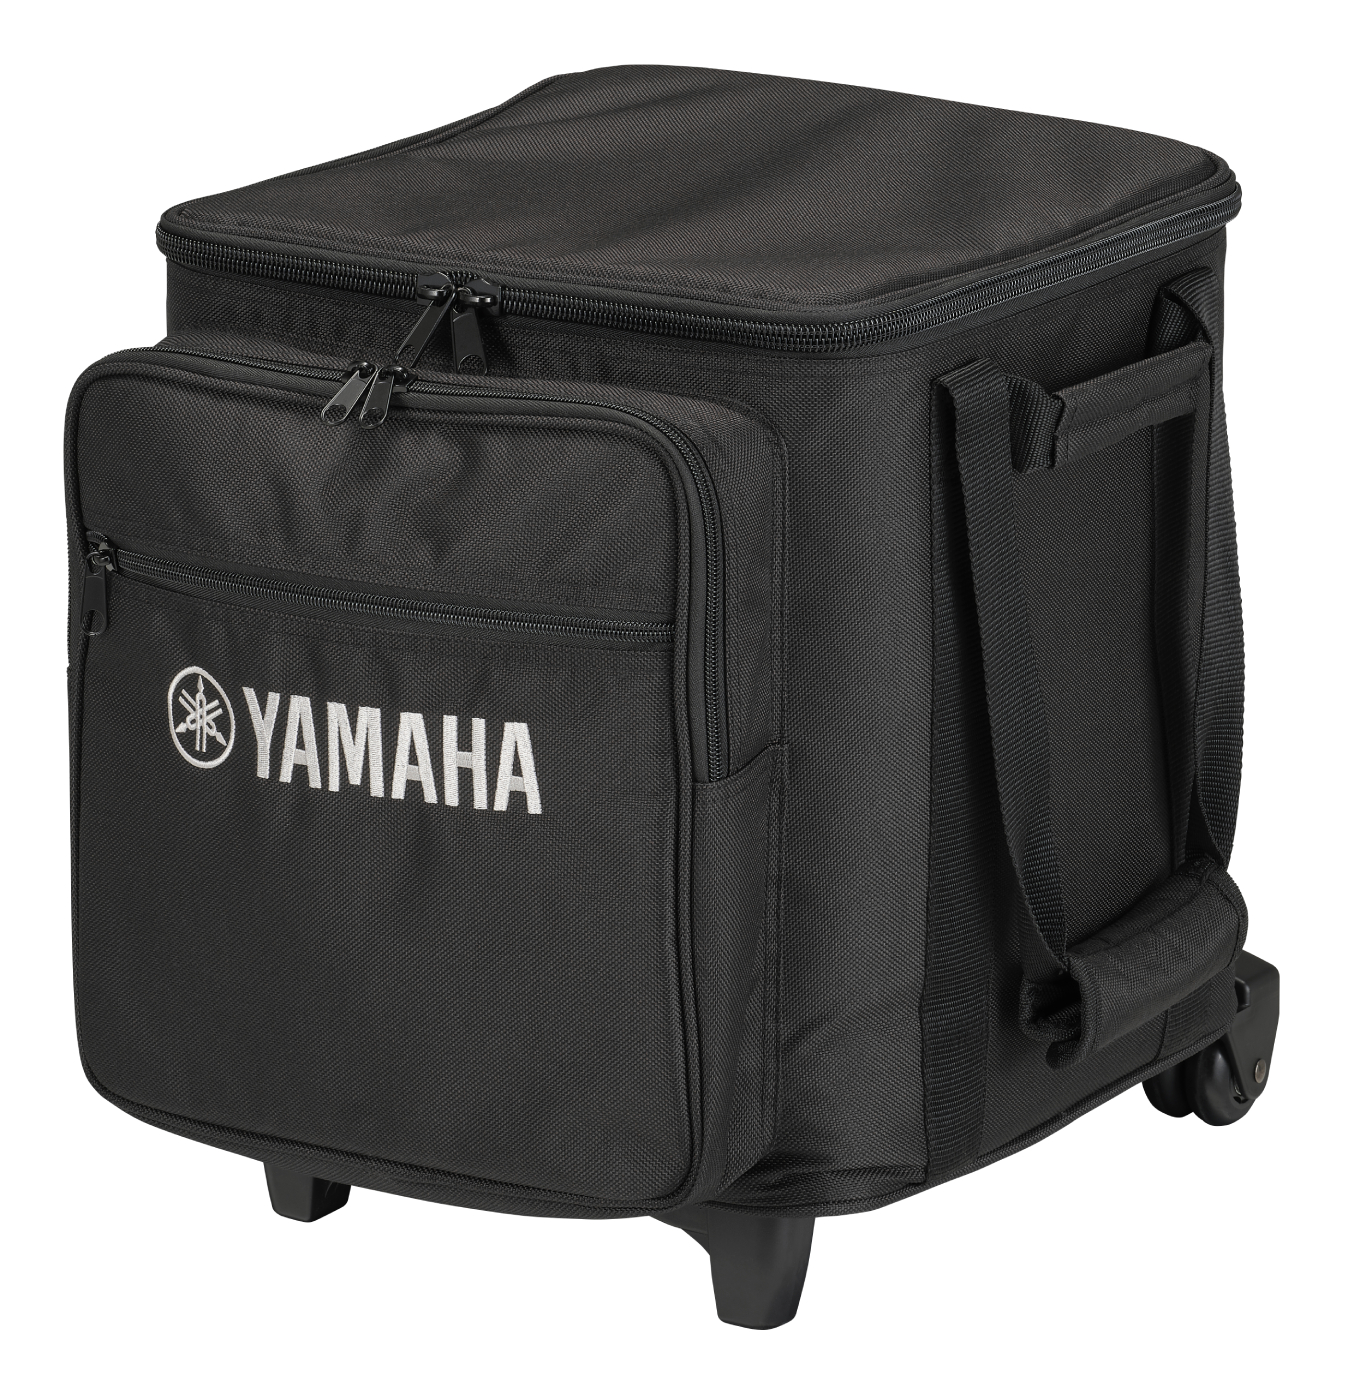 Yamaha Stagepas 200  + Valise Pour Stagepas 200 - Komplettes PA System Set - Variation 2